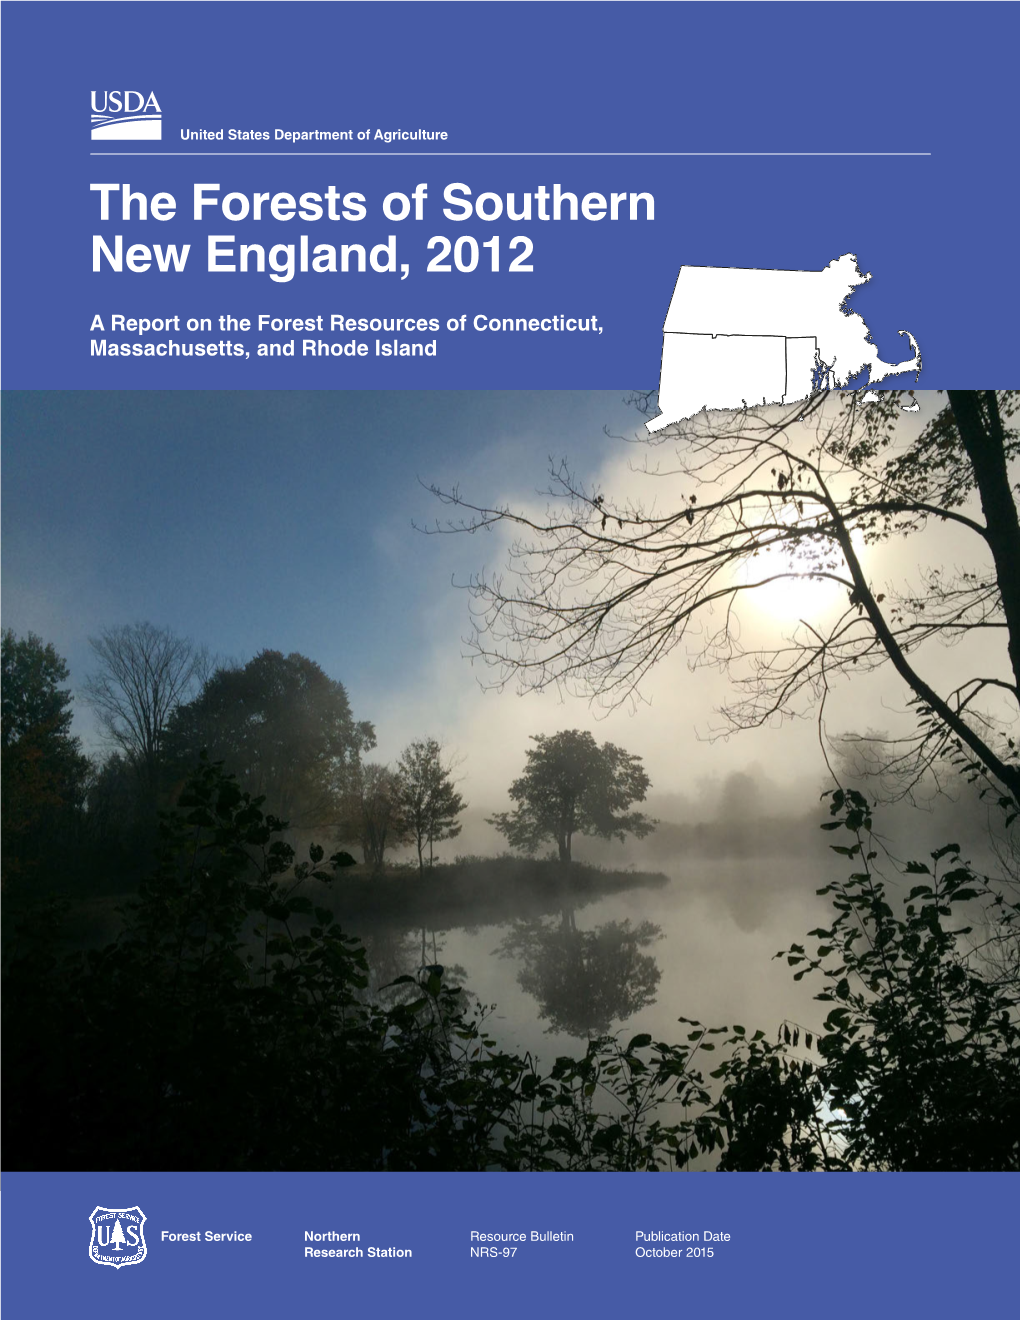 The Forests of Southern New England, 2012